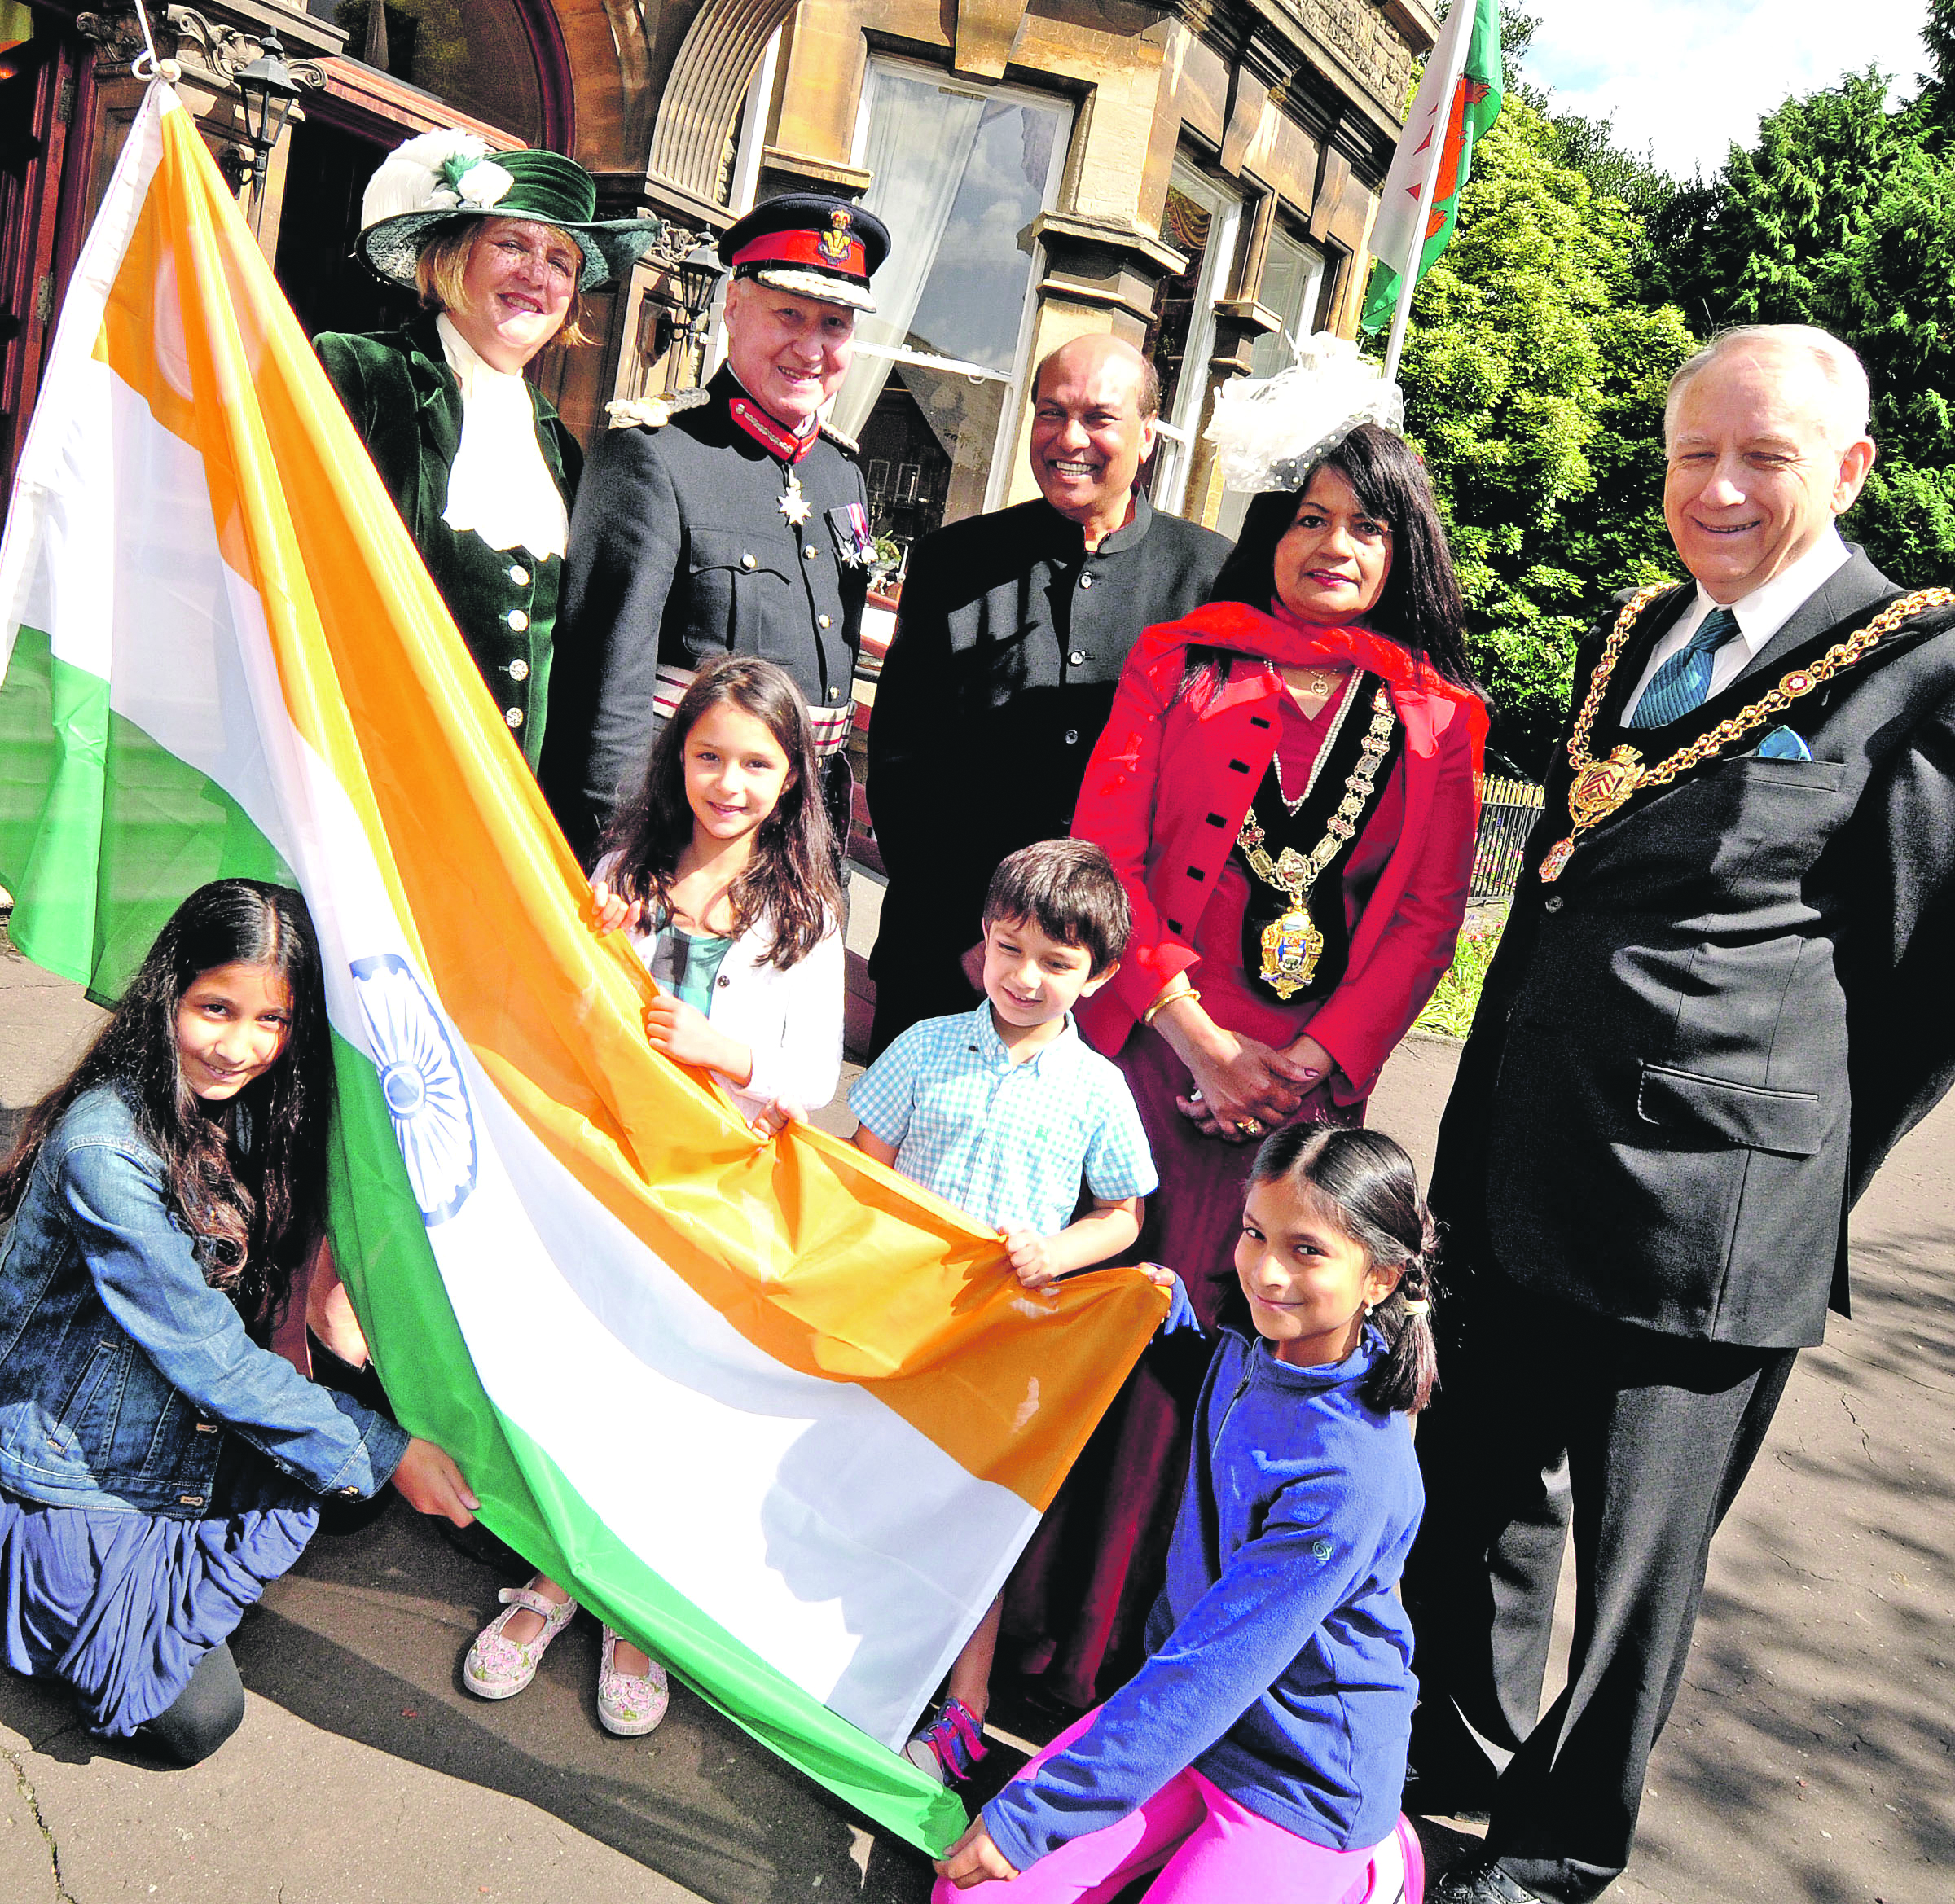 CELEBRATIONS: Marking Indian Independence Day in Wales with (L-R) High Sherriff Heather Stevens, Lord Lieutnant David Beck Hon consul Raj Aggarwal, Mayor of Colwyn Bay Dr. Sibani Roy and Lord Mayor of Cardiff with children